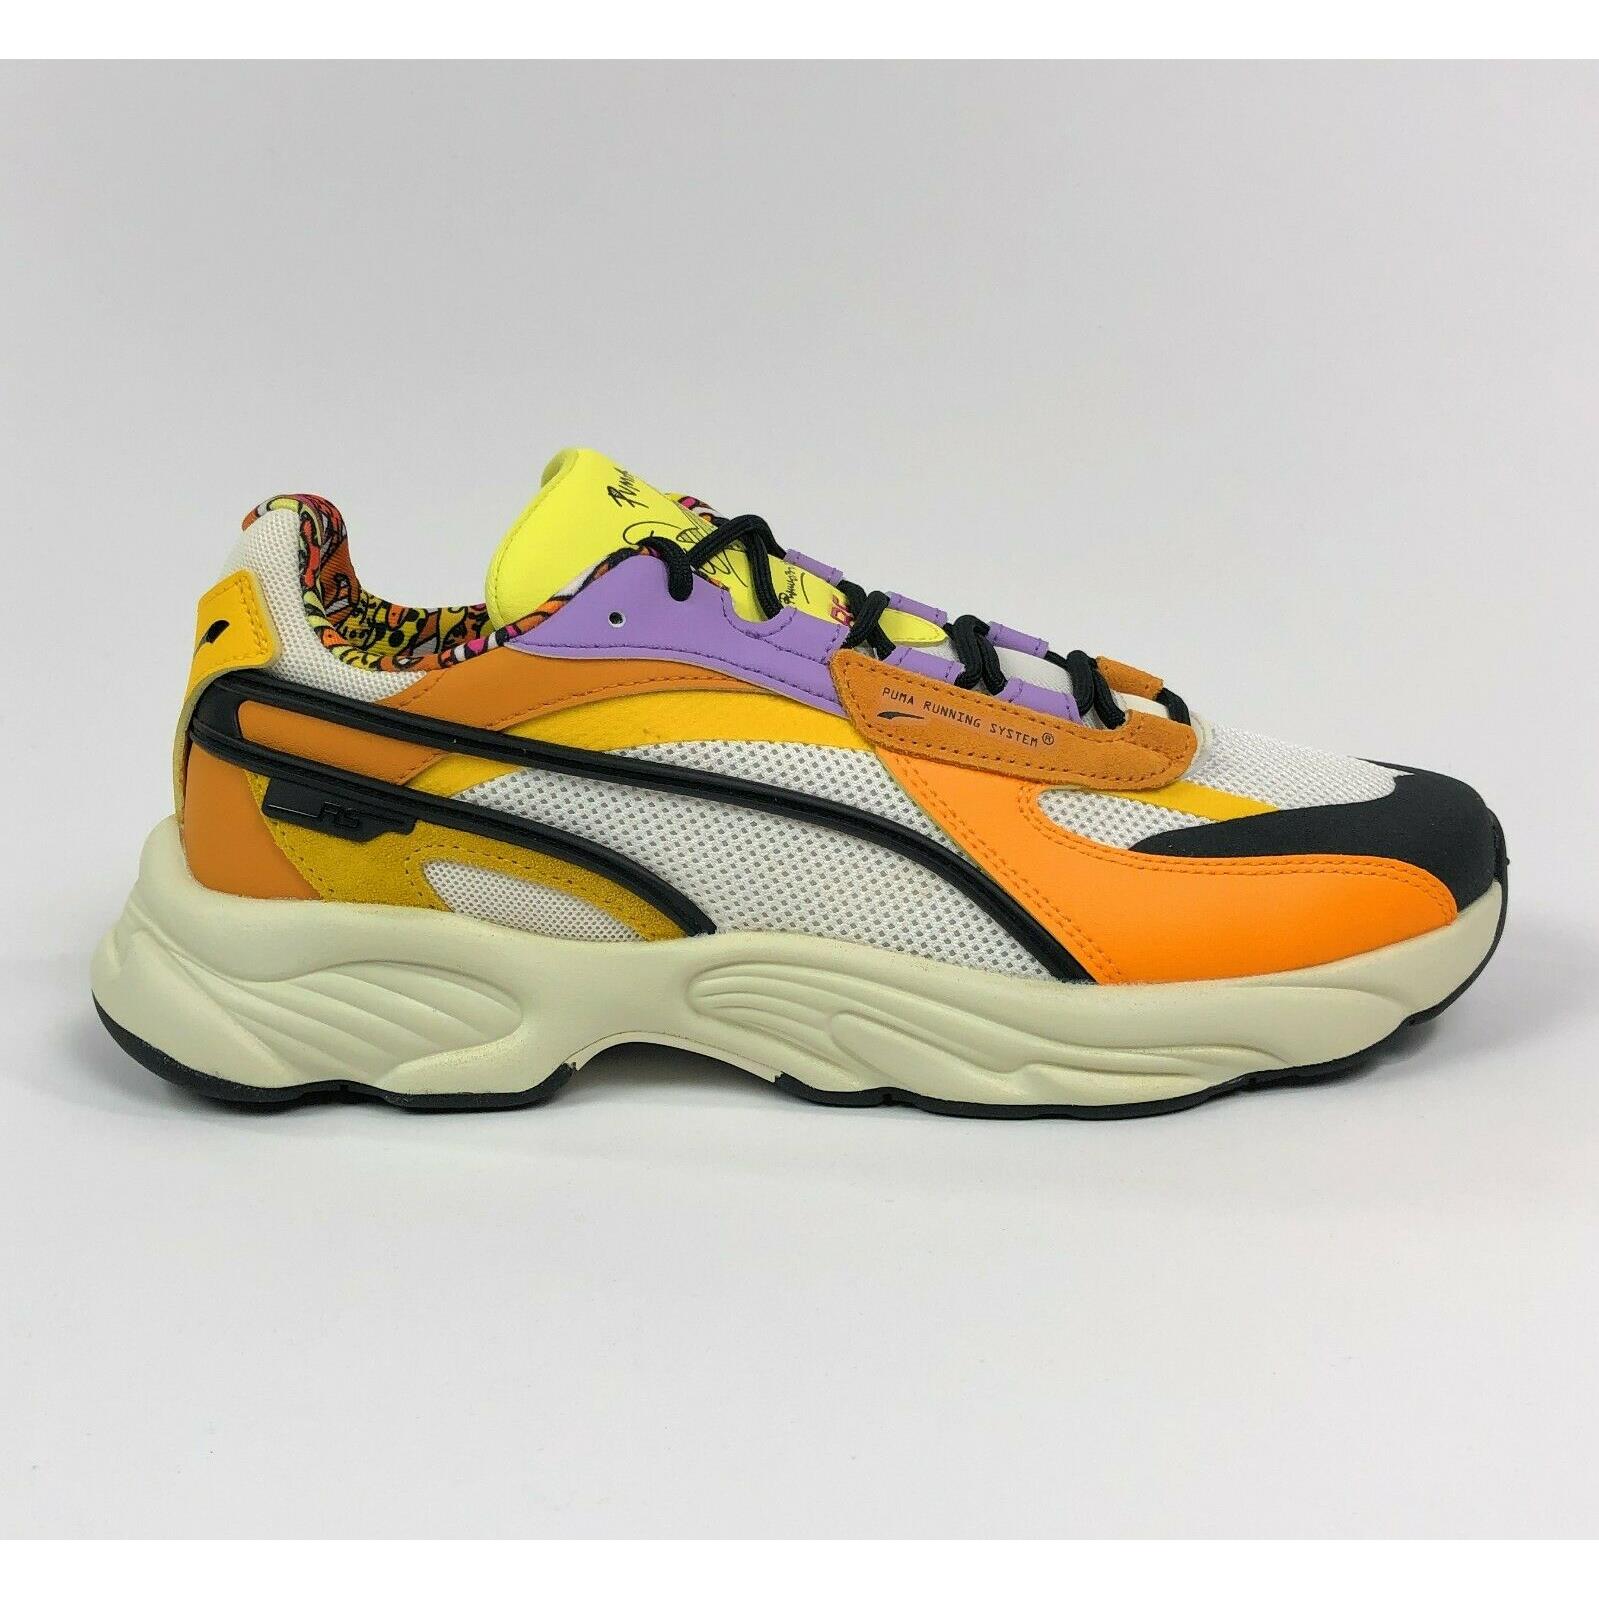 Puma x Romero Britto Rs-connect Shoes Sneakers Mens 9 Yellow White 382168-01